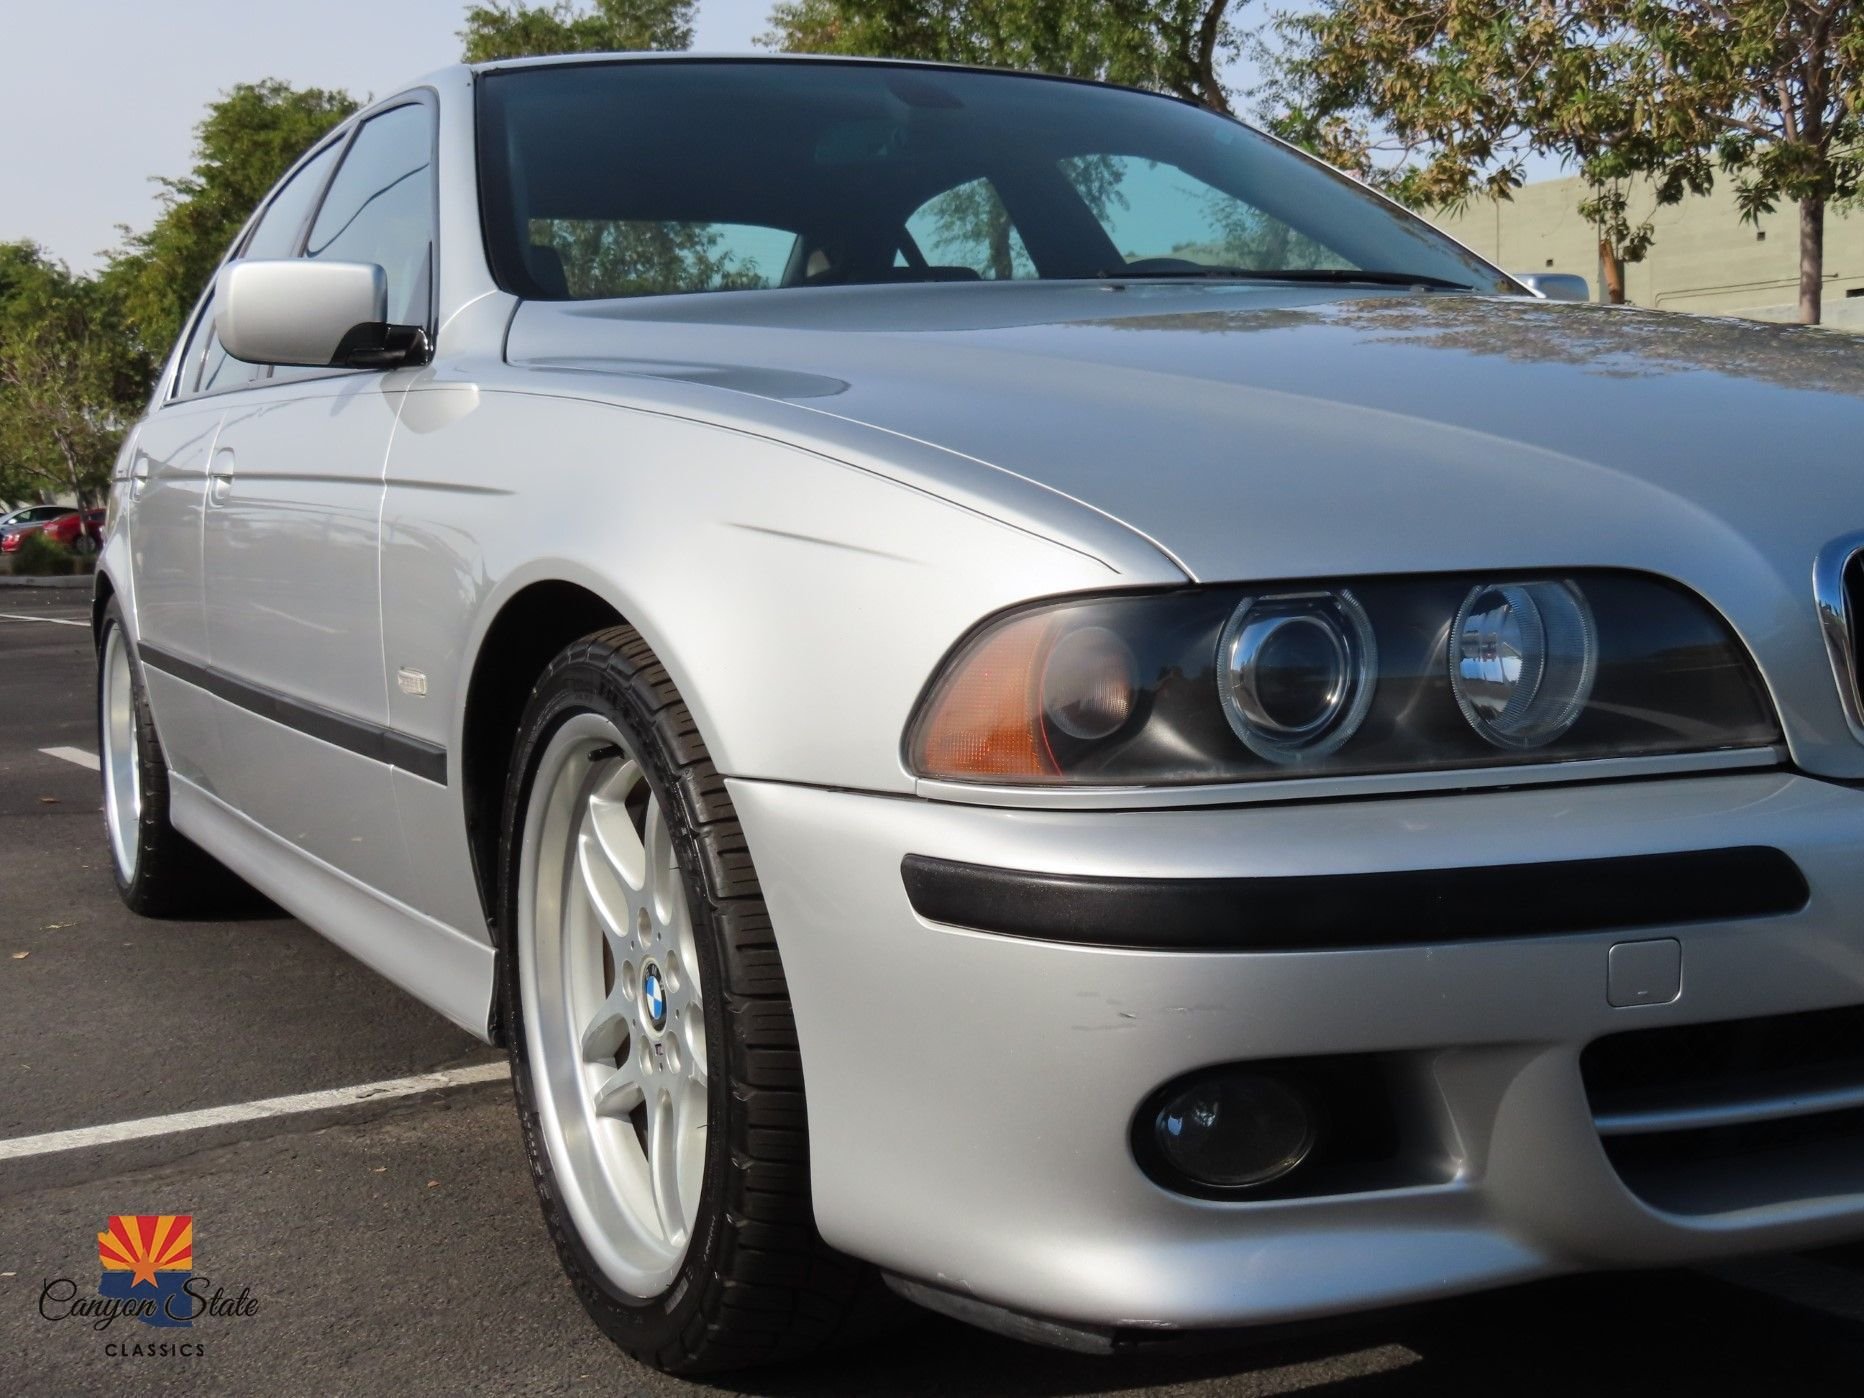 2003   BMW 5 Series 540i 4dr Sdn 6-Spd Manual - Canyon State Classics